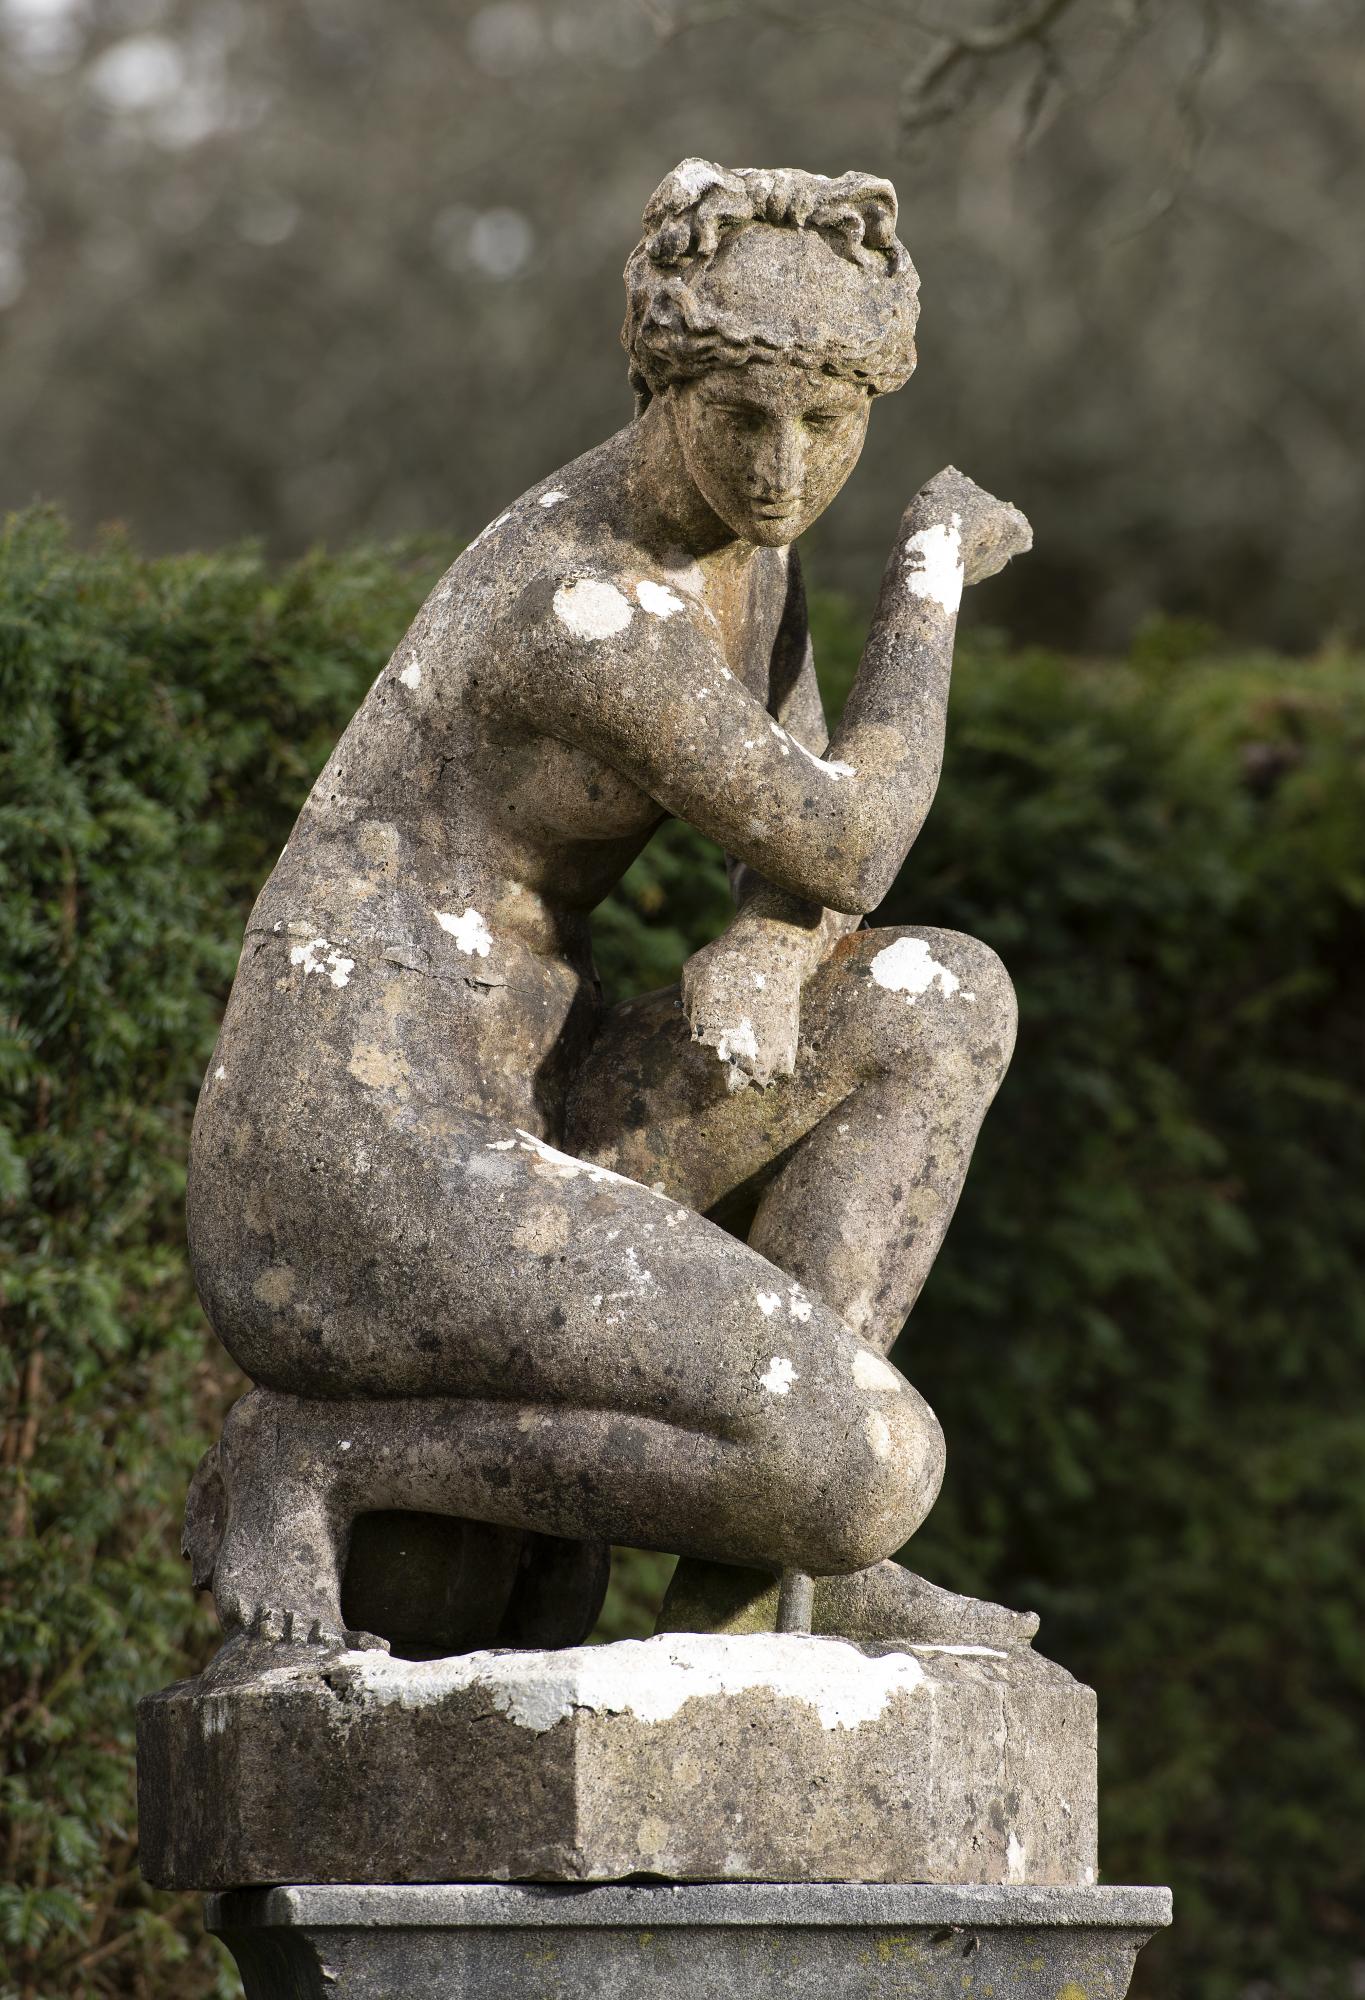 Garden statues: After the Antique: An Austin and Seeley composition stone figure of the crouching